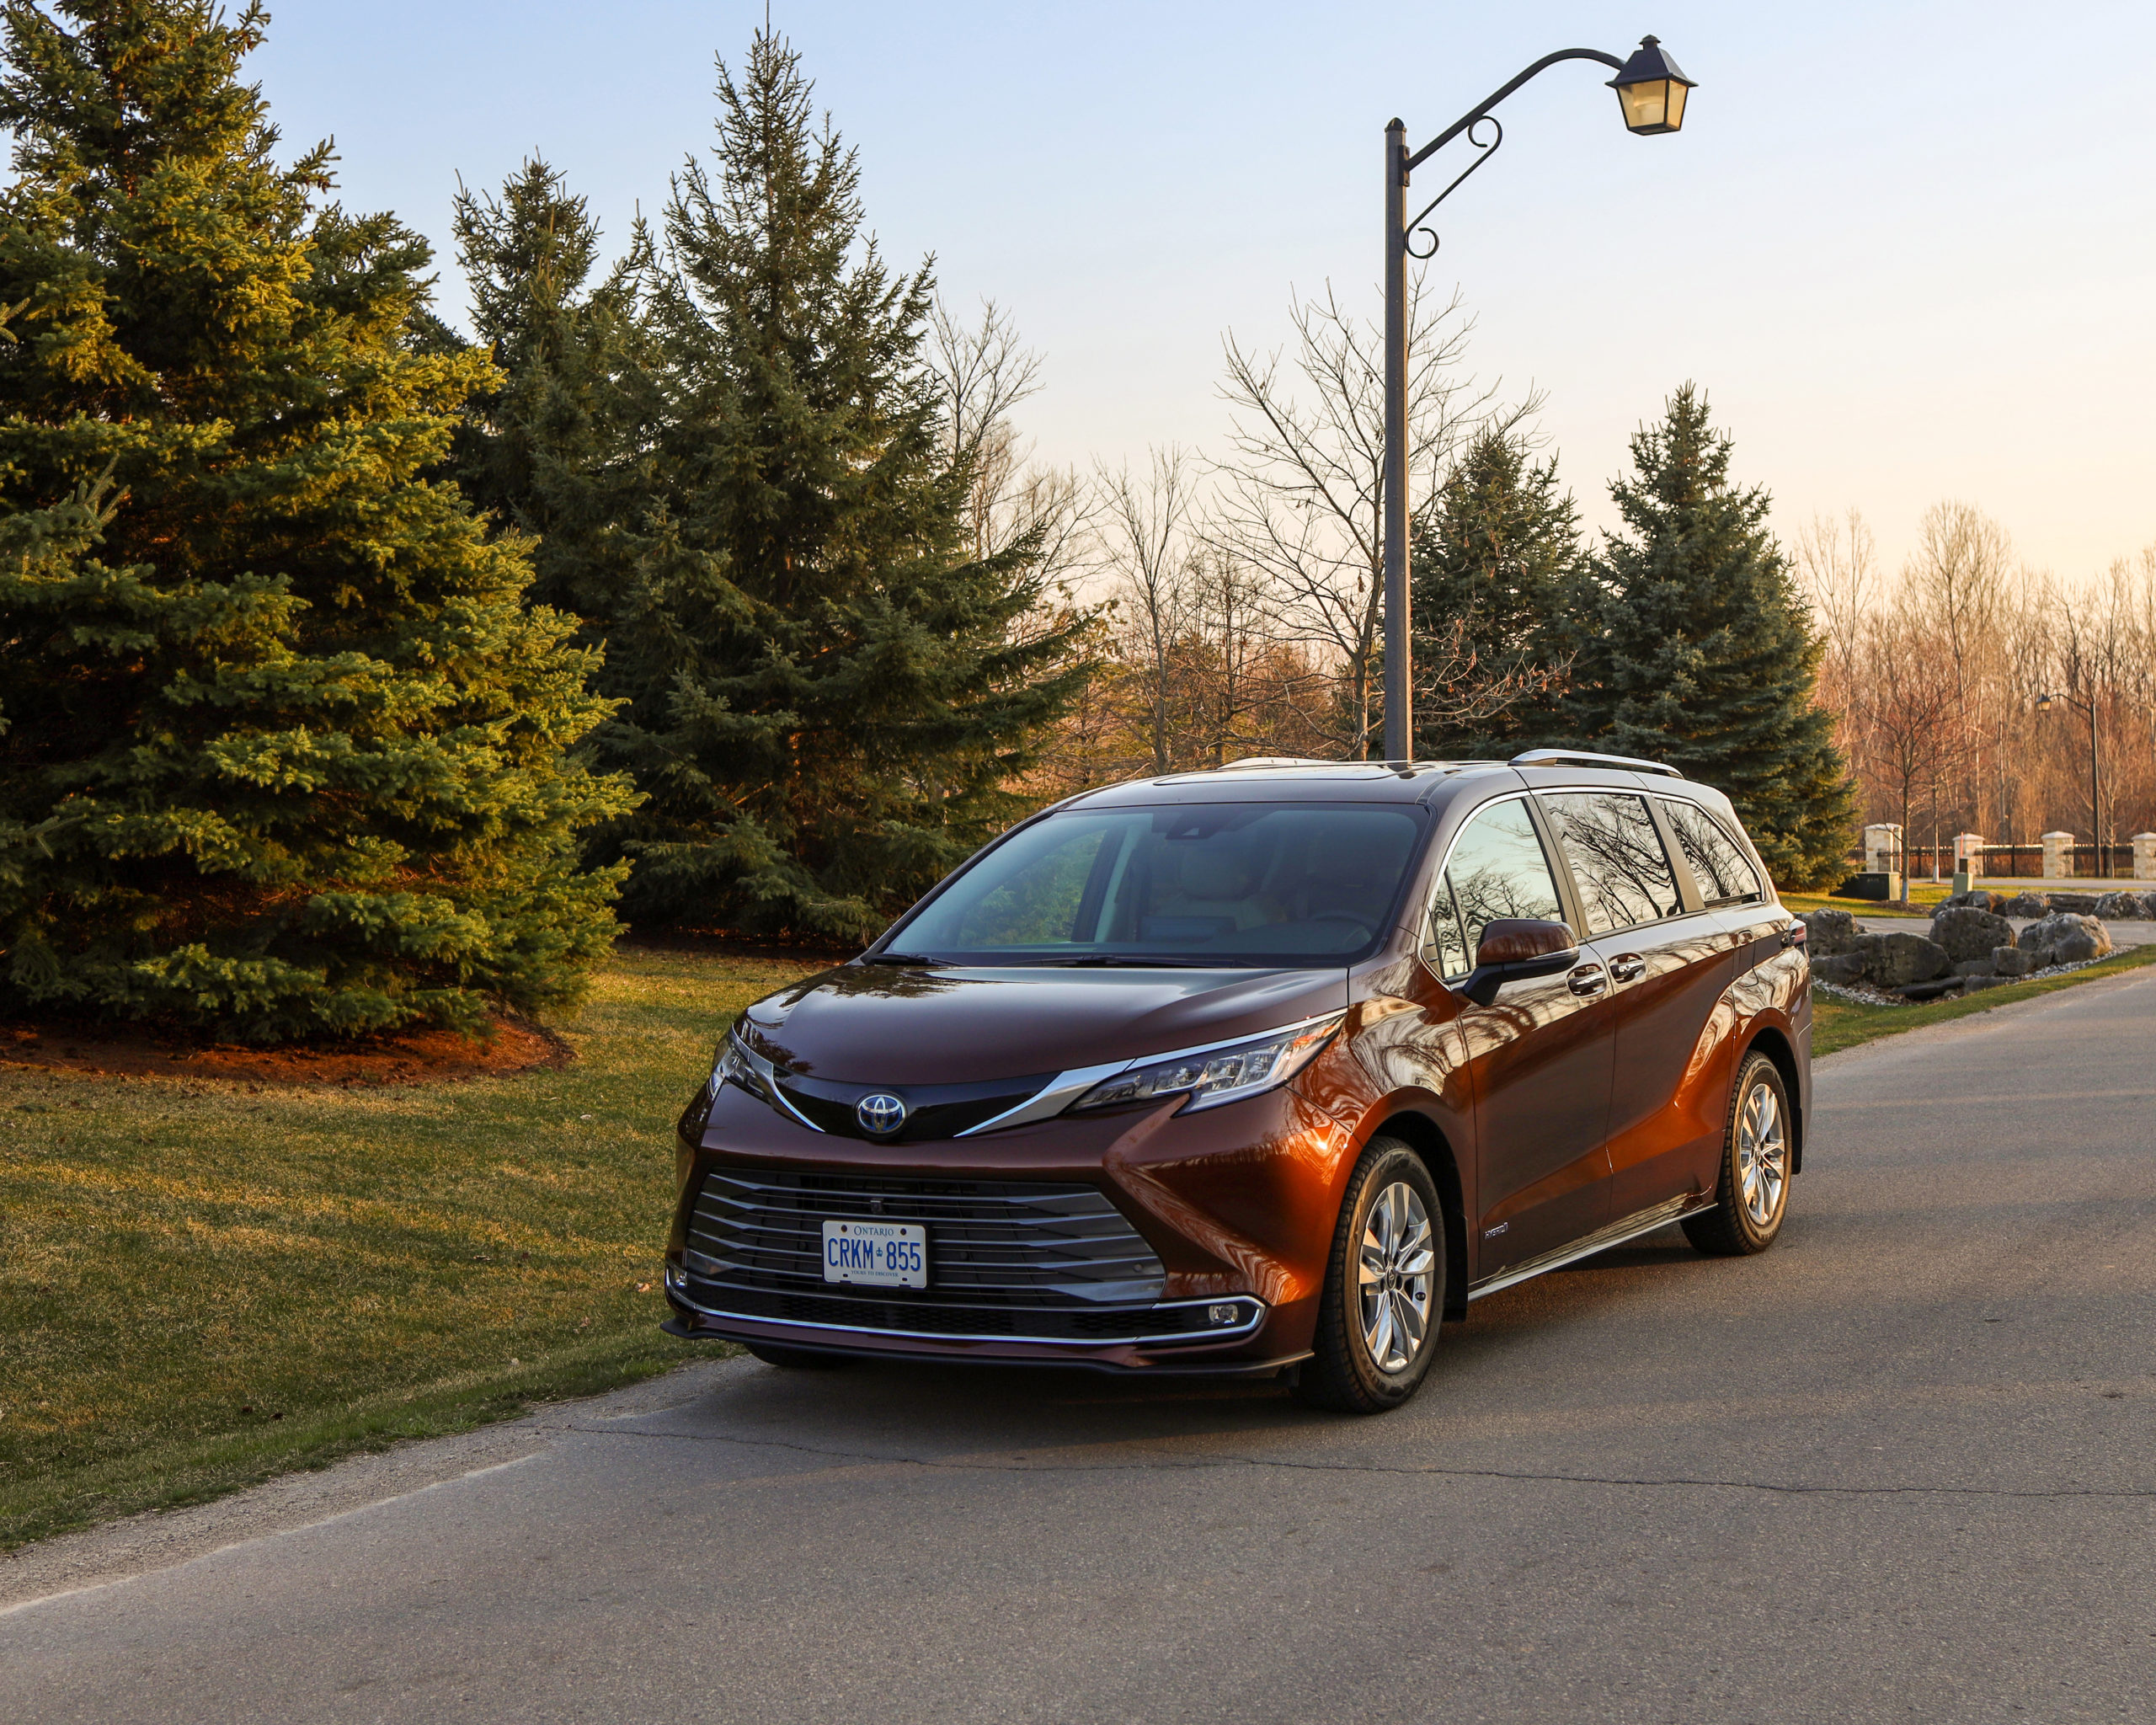 Live Your Life in Style: The All-New, All-Hybrid 2021 Toyota Sienna -  Listen to Lena